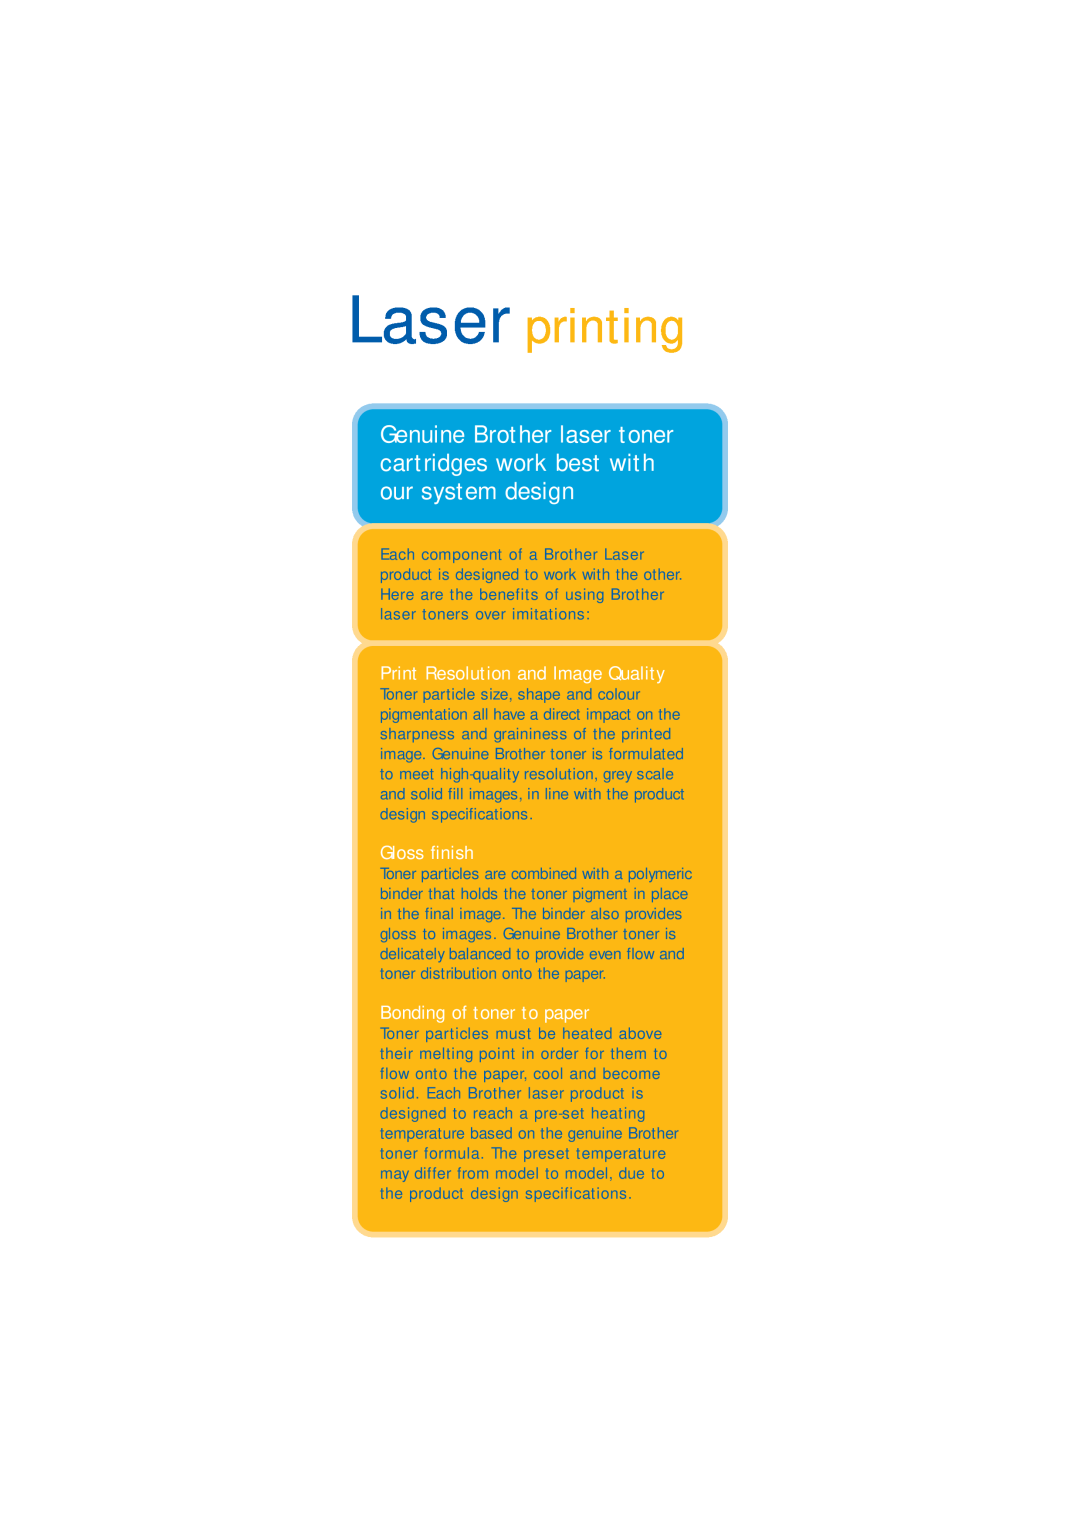 Brother QL-500 manual Laser printing, Print Resolution and Image Quality, Gloss finish, Bonding of toner to paper 